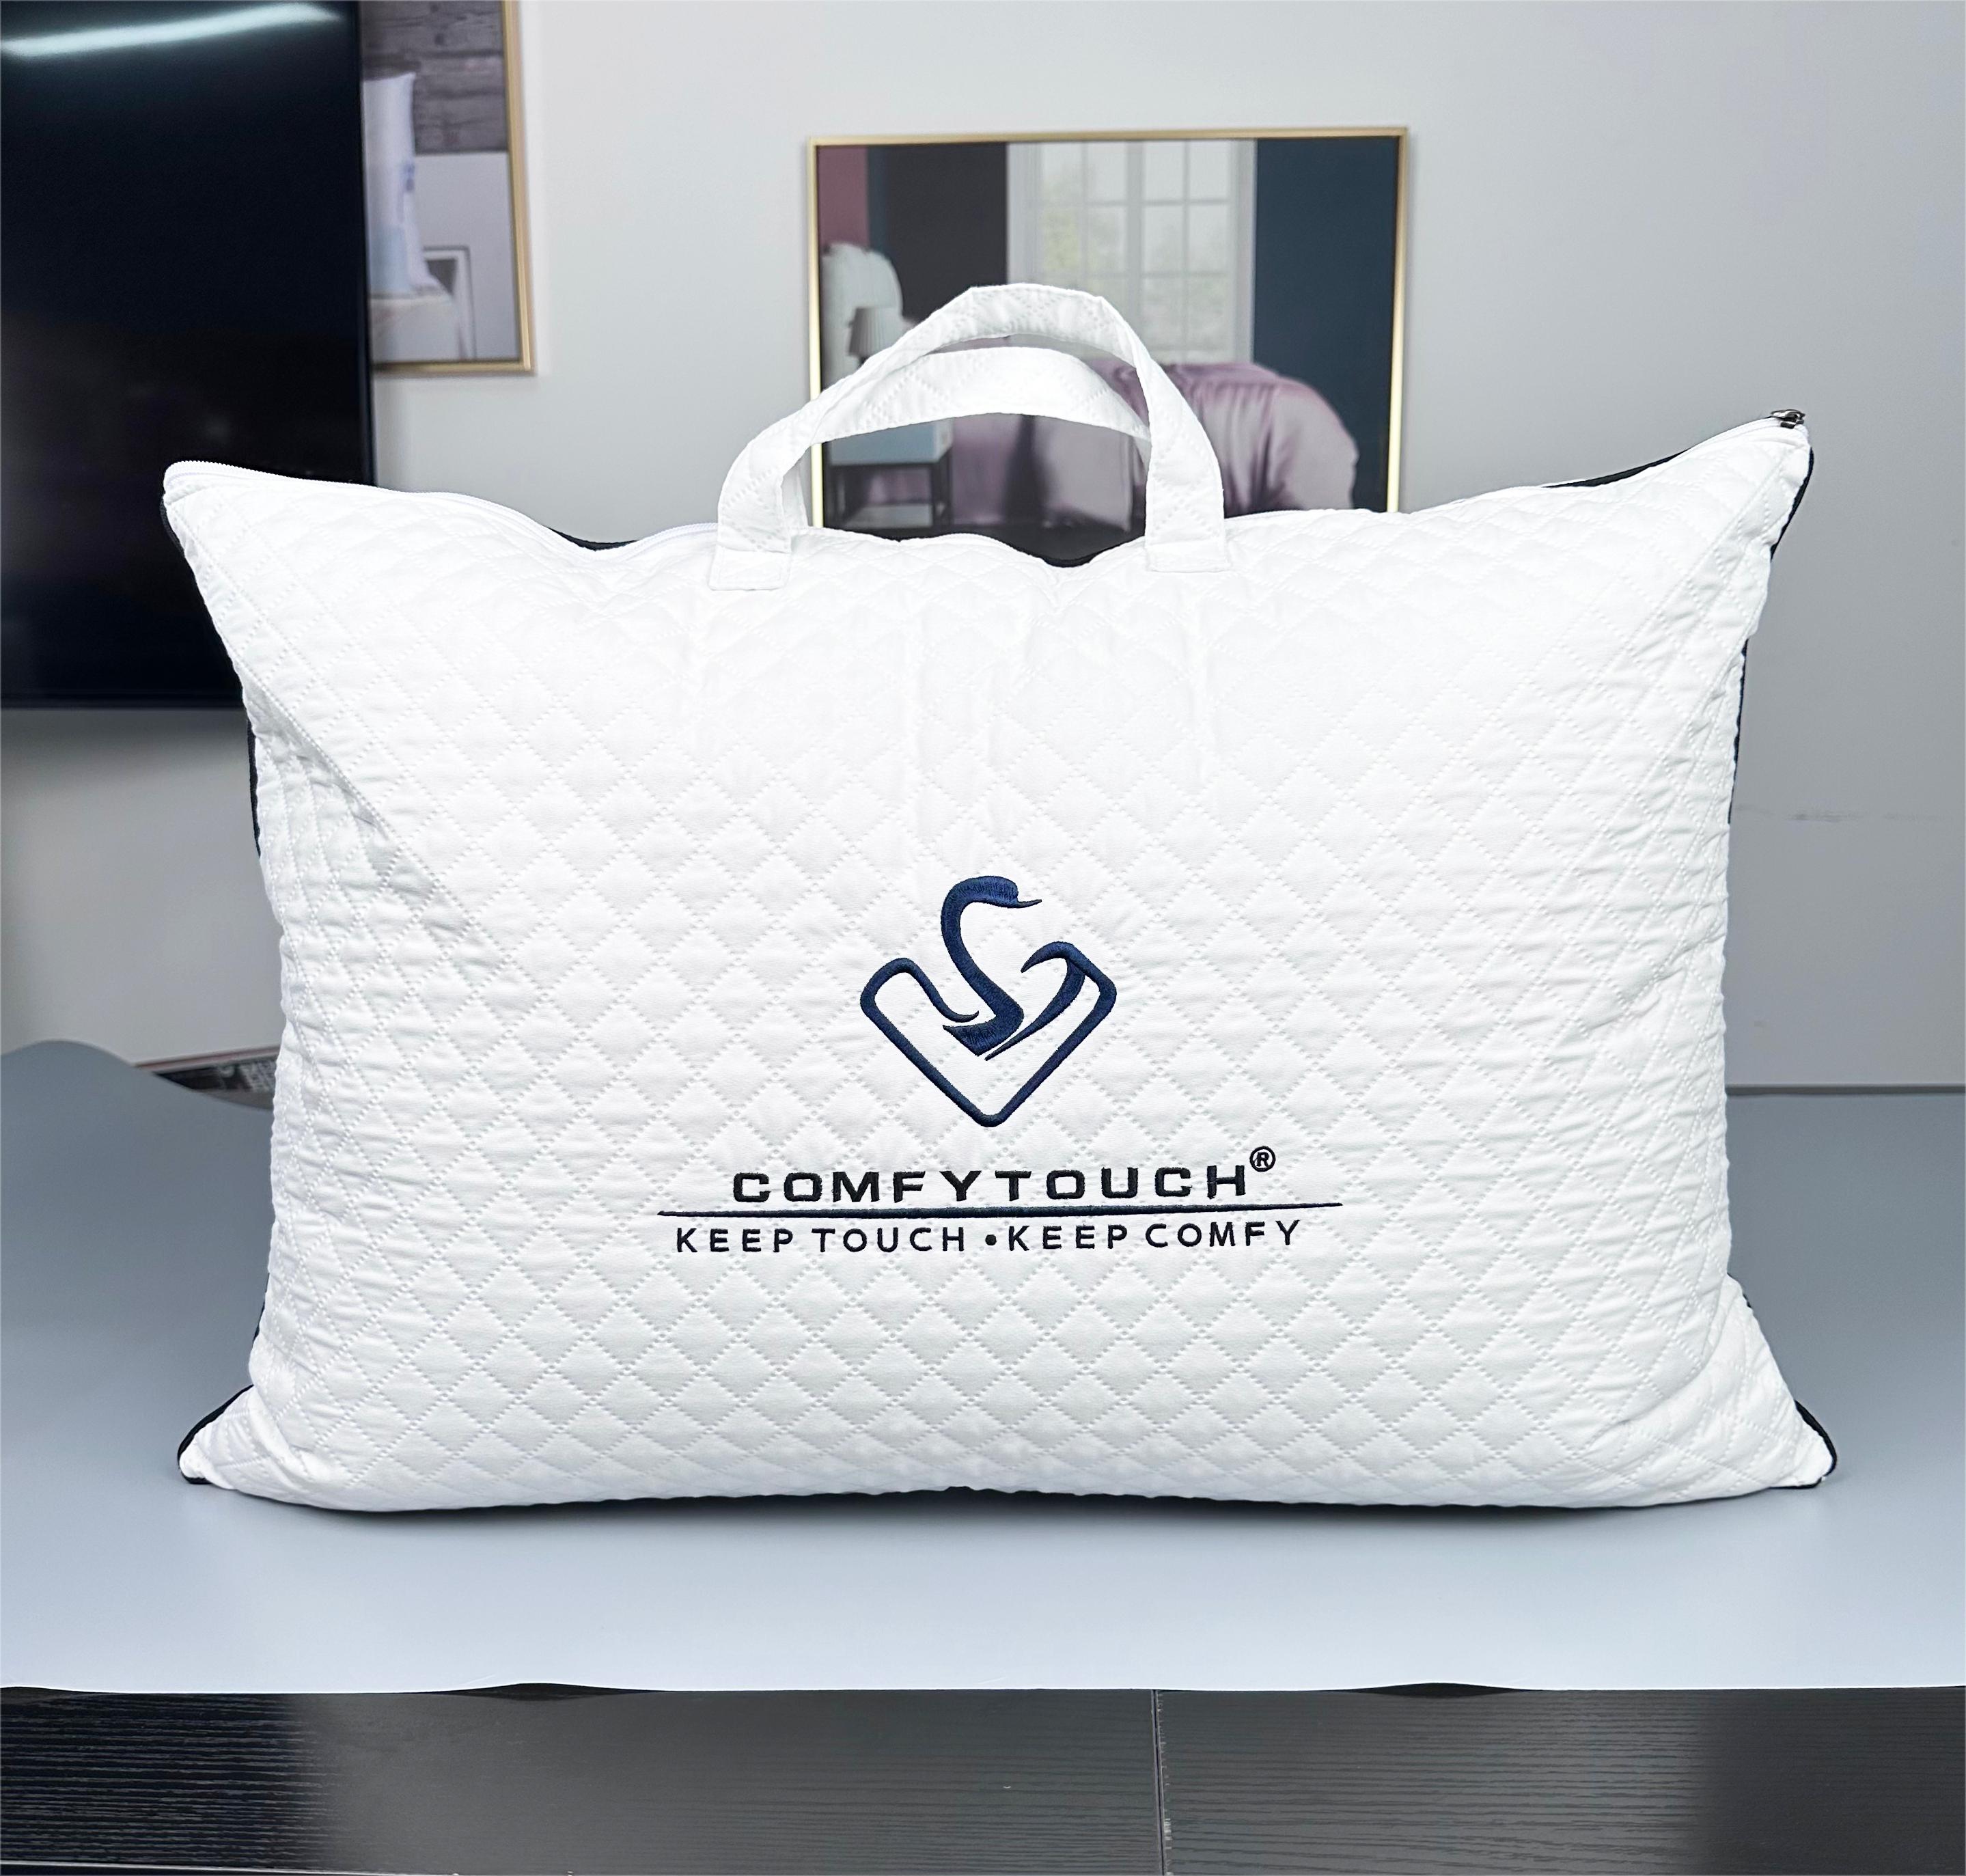 Customized Quilted logo emboridery fabric bag for pillows, comforters, duvets, quilts